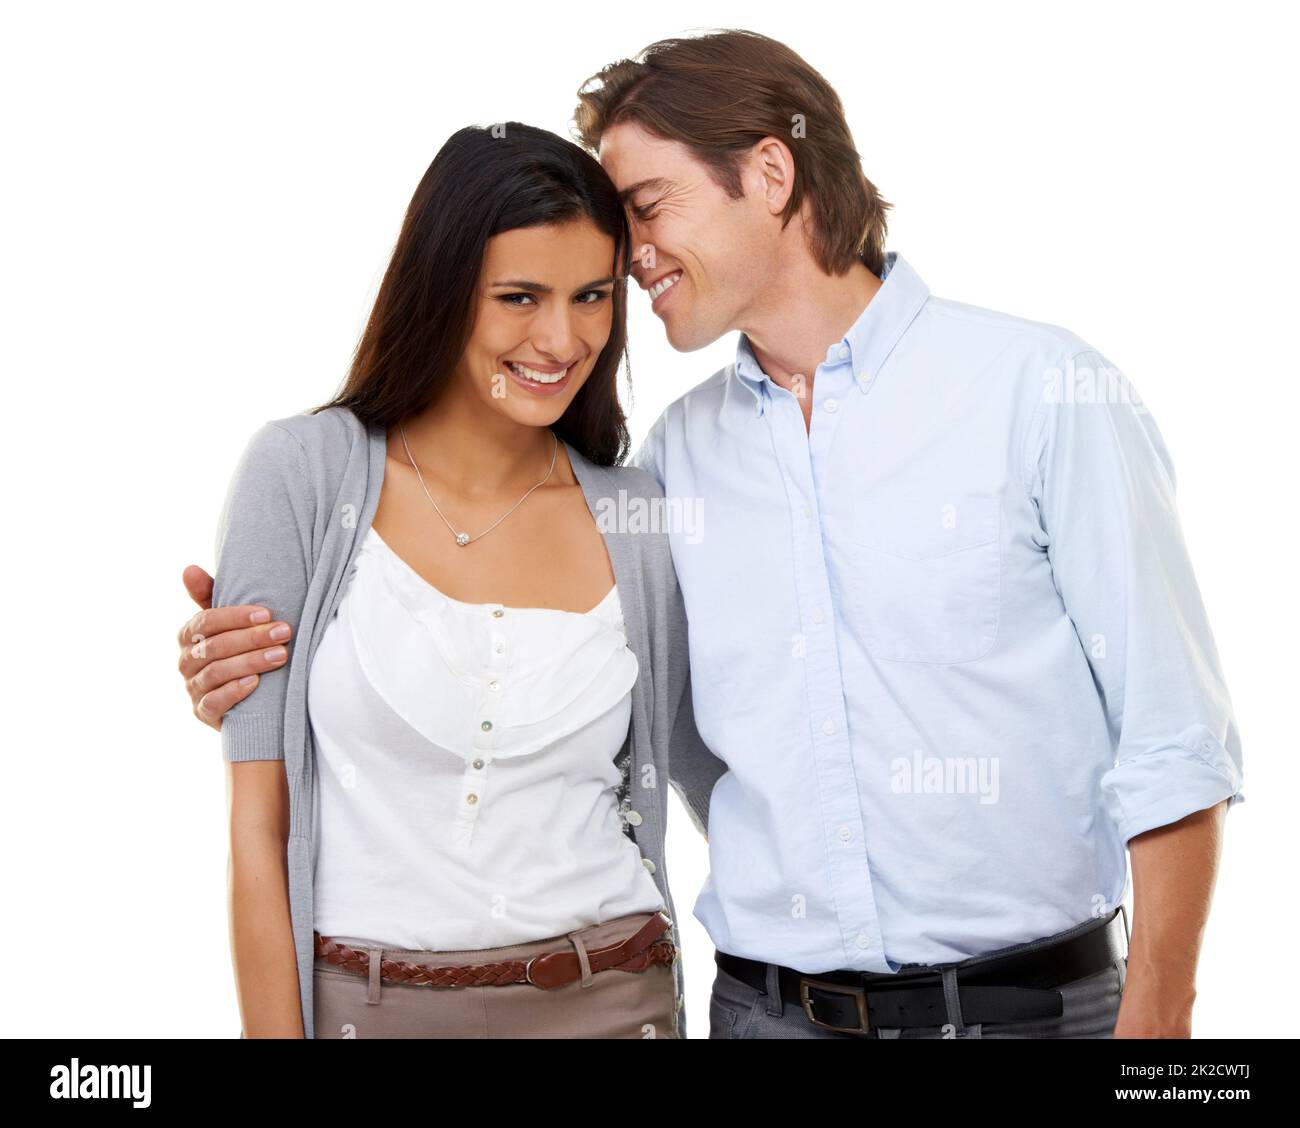 Hes crazy about her. Portrait of a multi-ethnic couple isolated on a white background. Stock Photo